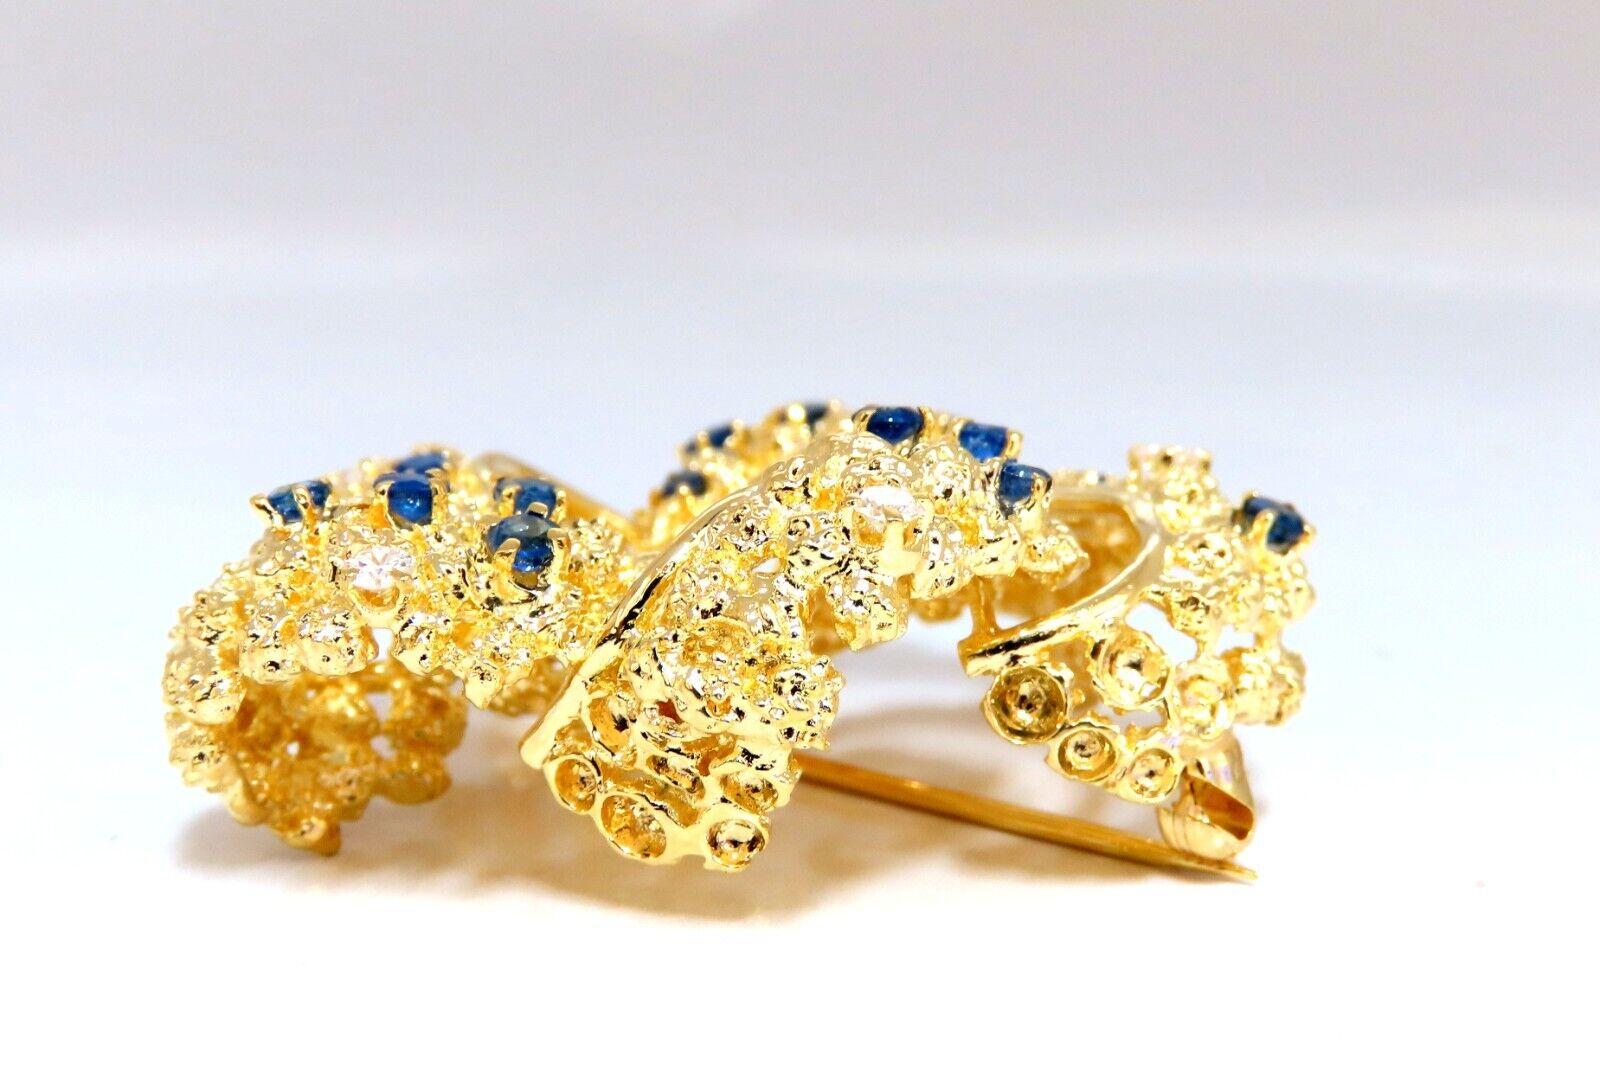 Swirling 3D Crest Pin

Very Well Made



.50ct natural diamonds

G-color Vs2 Clarity

.80ct natural sapphire

1.8 x 1.6 inch 

Handmade 

18kt. yellow gold 

30 Grams.

$8000 Appraisal to accompany